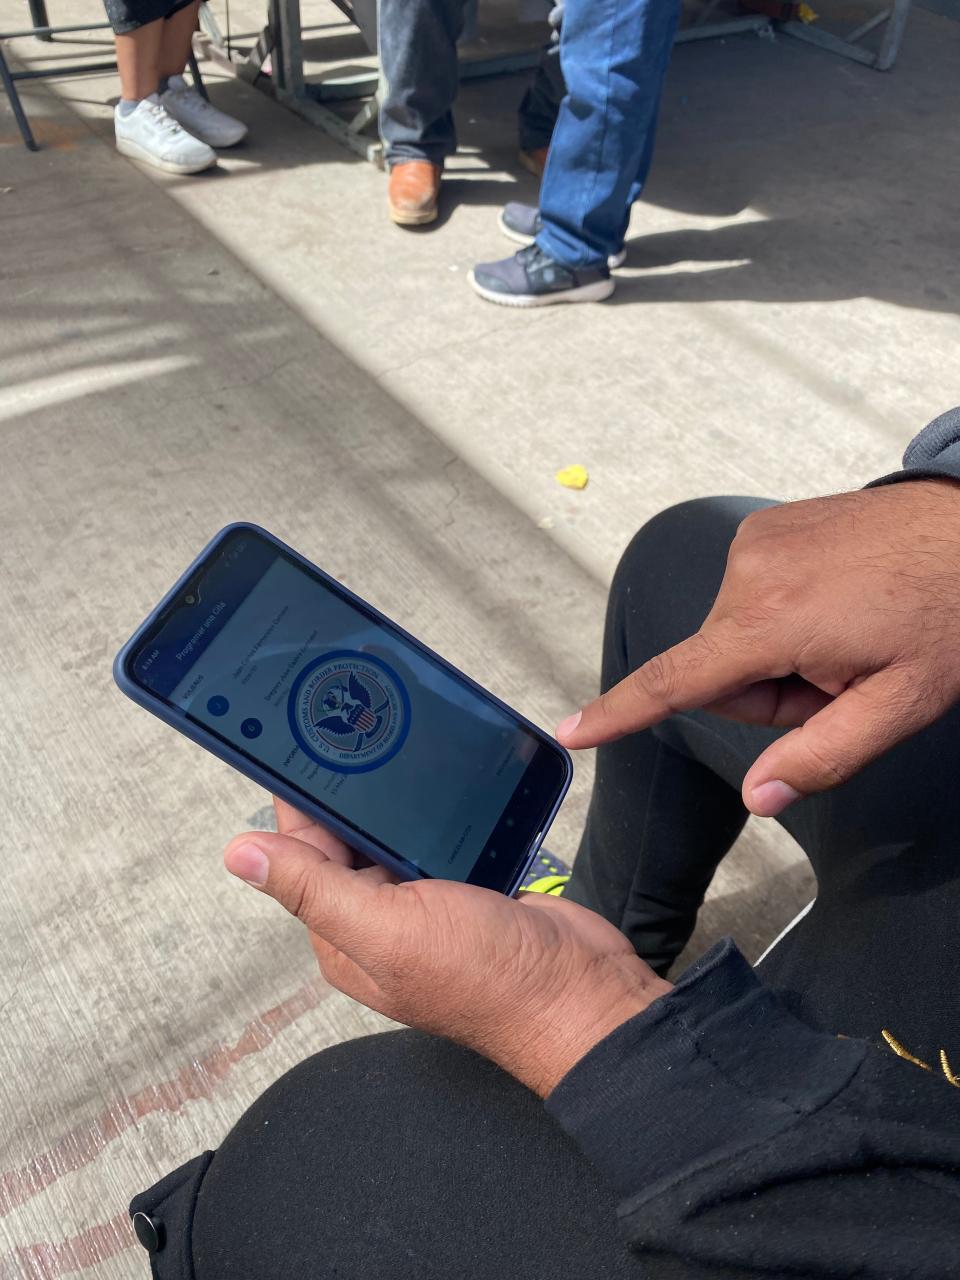 Juan Fernandez, a migrant from Venezuela, shows a screenshot of the error screen he received when he tried to book an appointment through the mobile government application, CBP One.